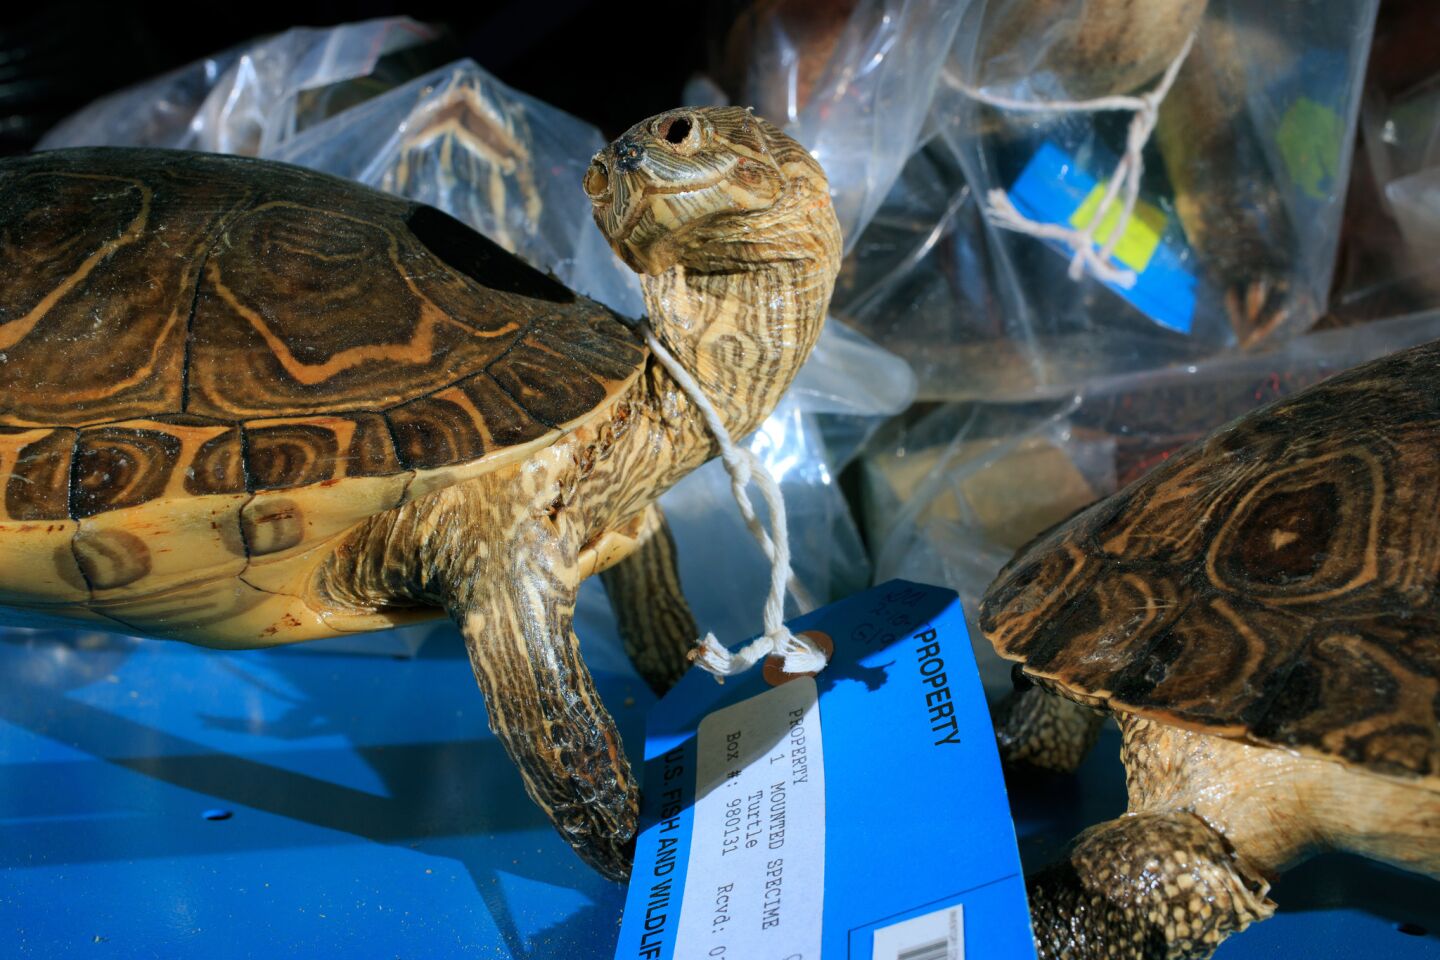 A shelf of turtles inside the U.S. Fish and Wildlife Service National Wildlife Property Repository.